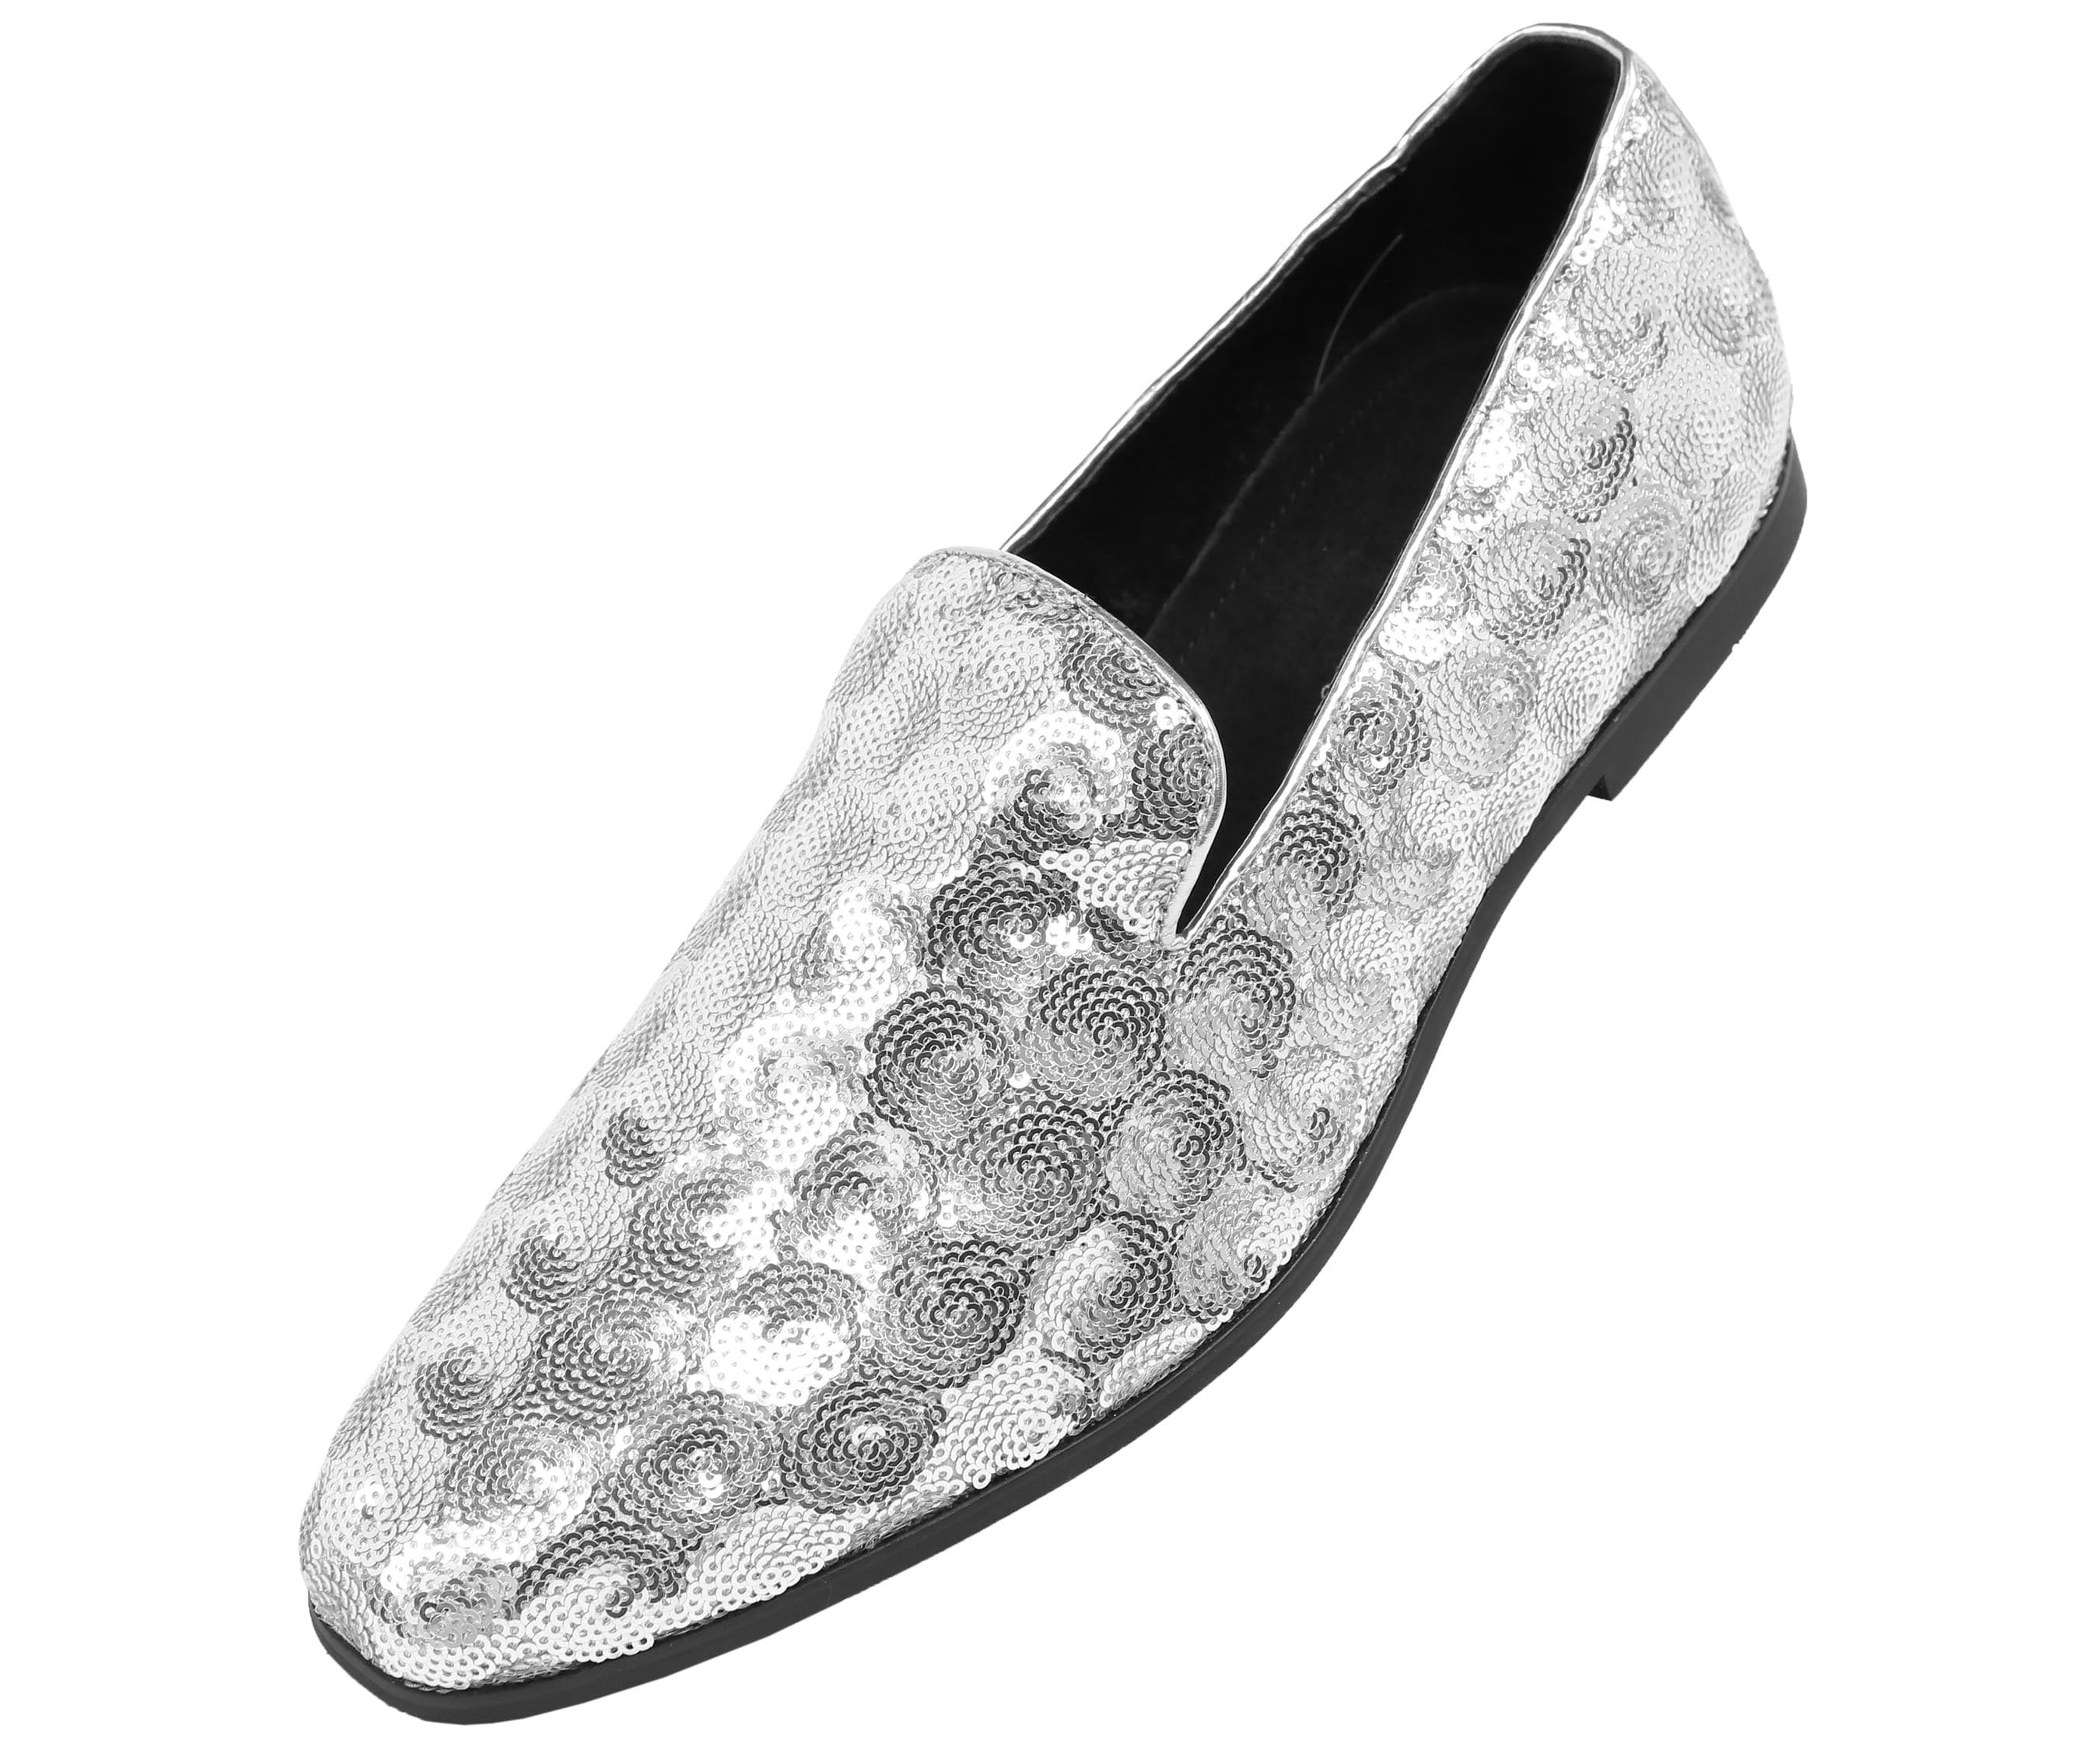 Mens Sequin Dress Formal Shoes Slip on Loafers Silver Sequin casual show Shoes 